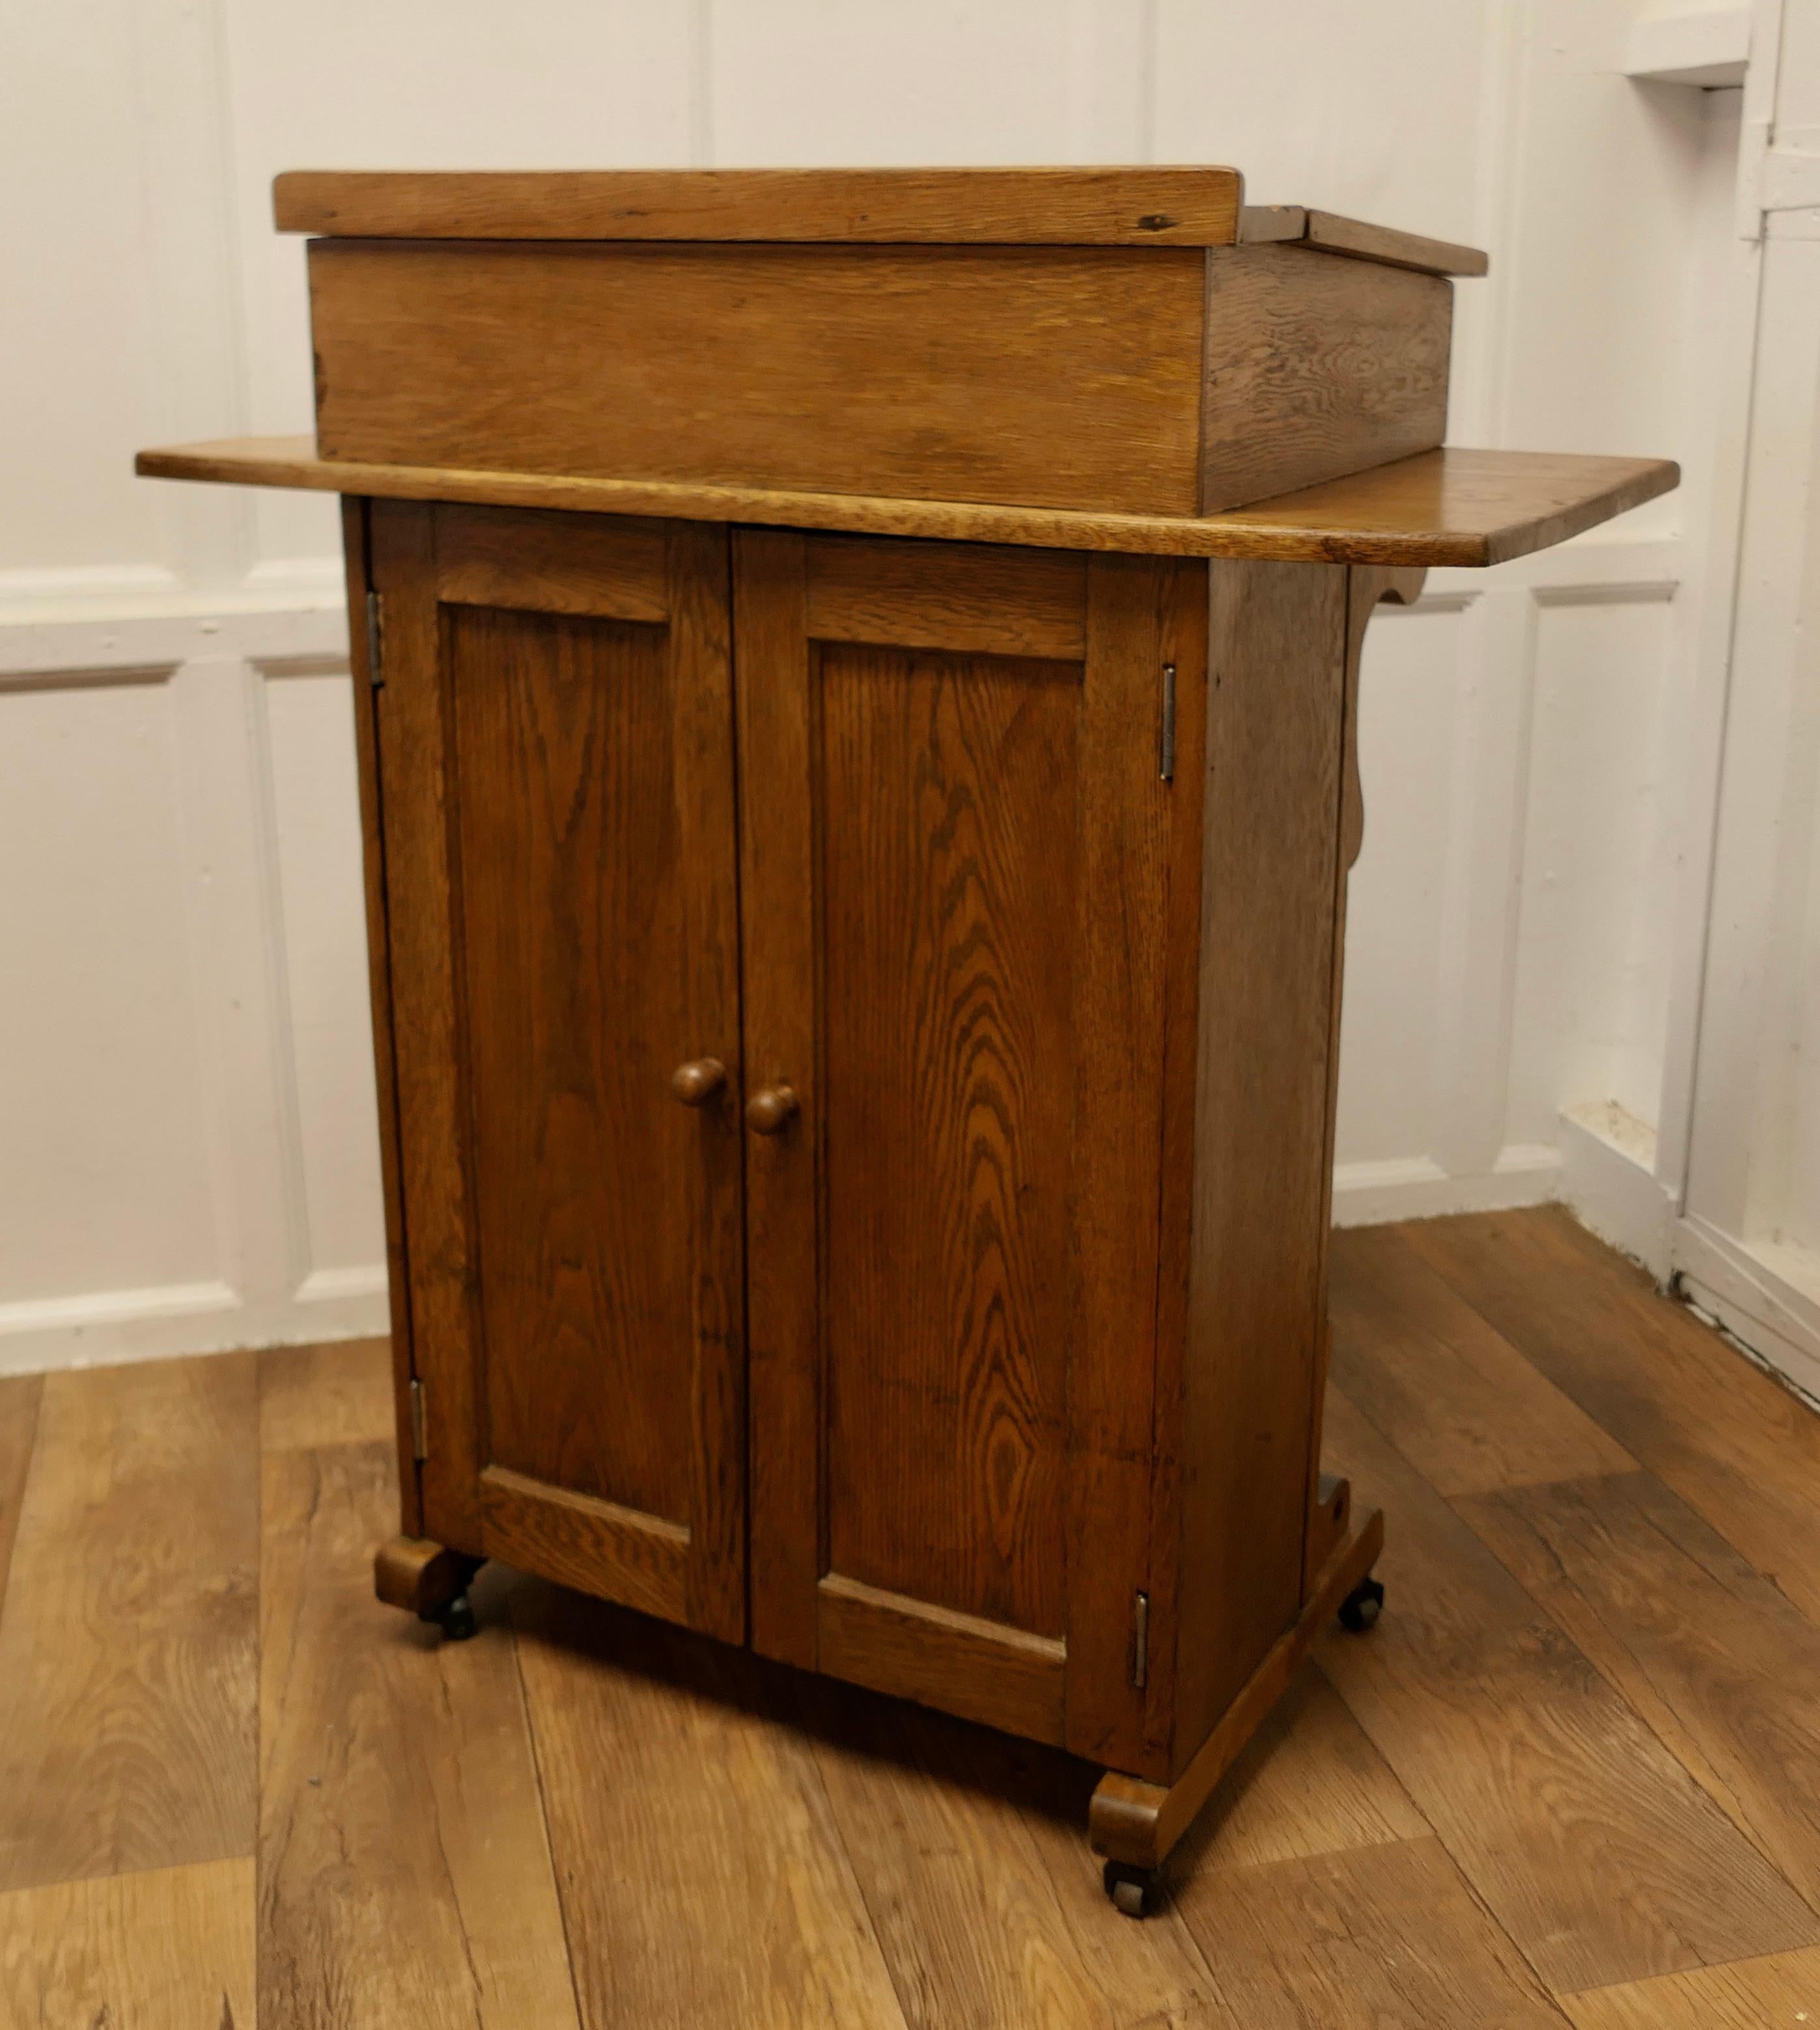 Medium Oak Hotel Restaurant Reception Hostess Greeting Station, Greeter   In Good Condition For Sale In Chillerton, Isle of Wight